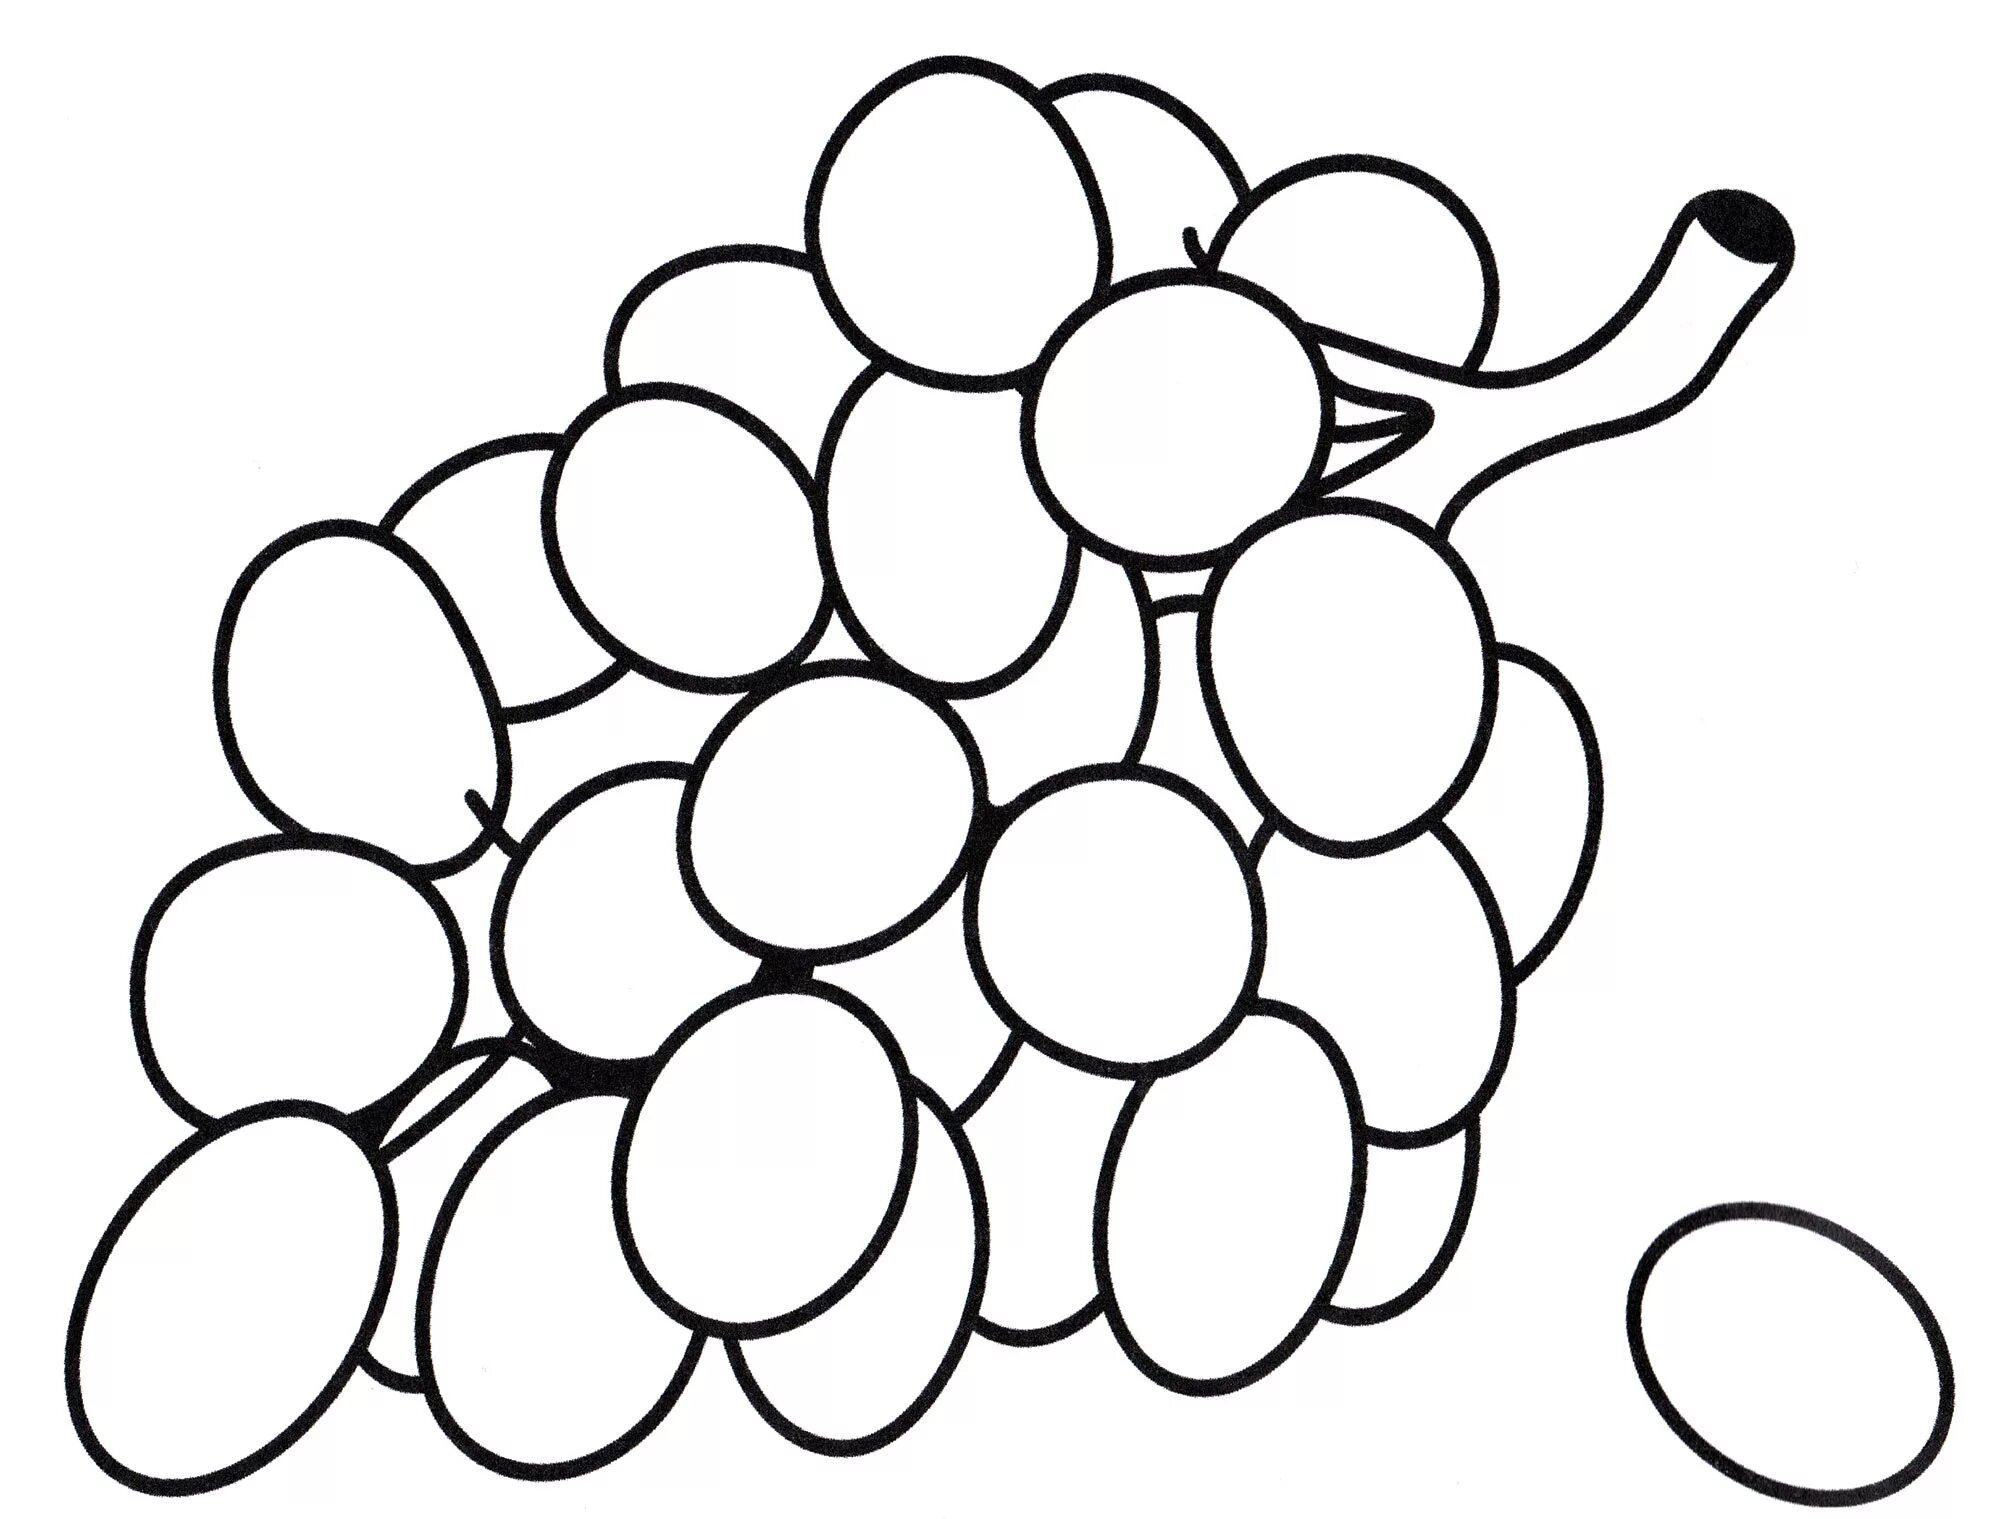 Live Grape Coloring for Toddlers